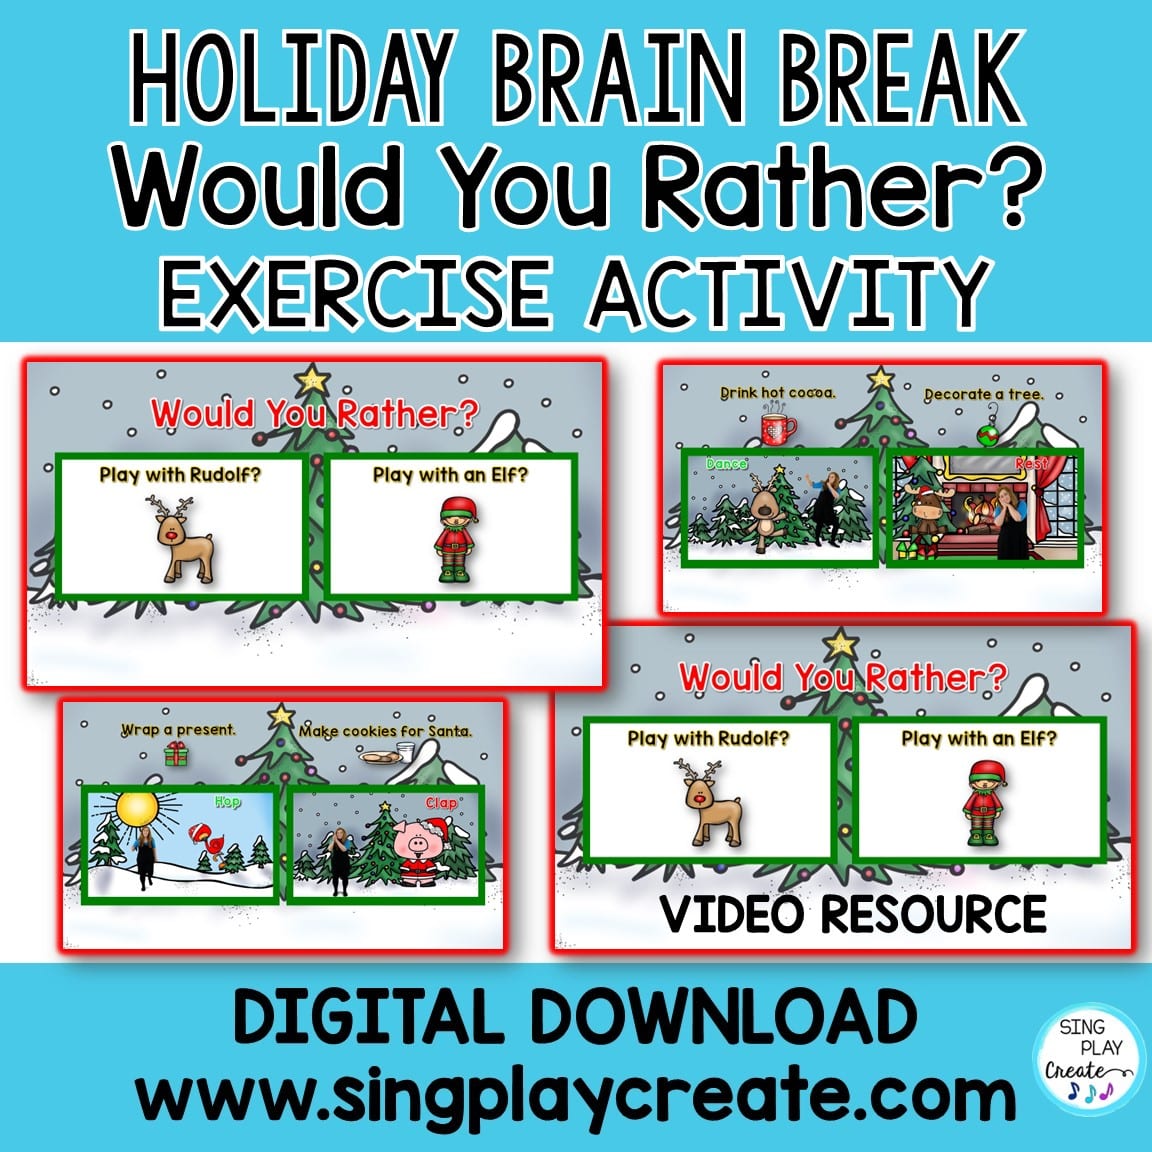 Christmas Would You Rather Questions to Print FREEBIE! Fun Holiday